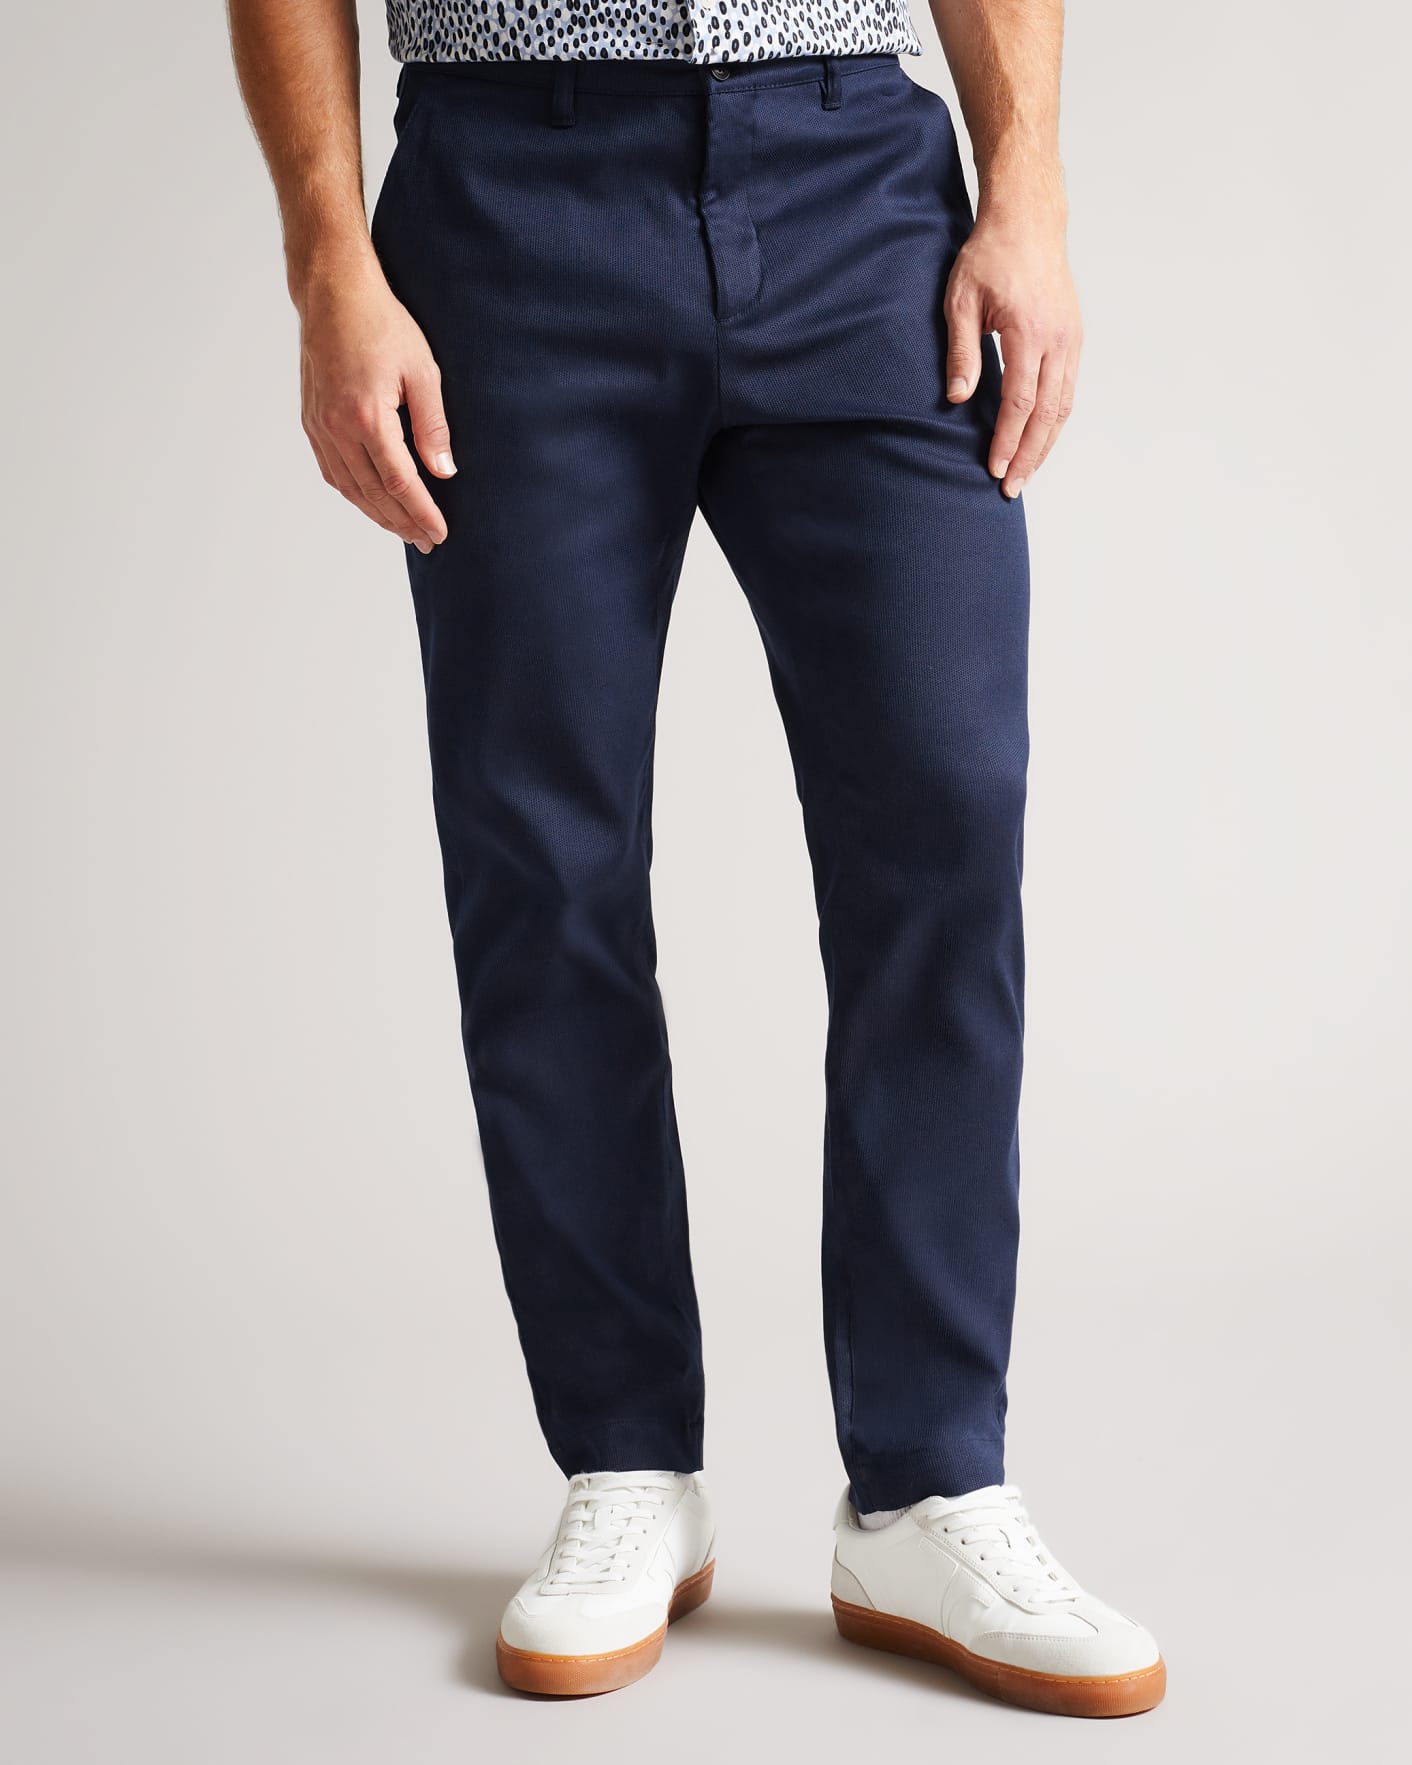 NAVY Camburn Fit Textured Trs Ted Baker